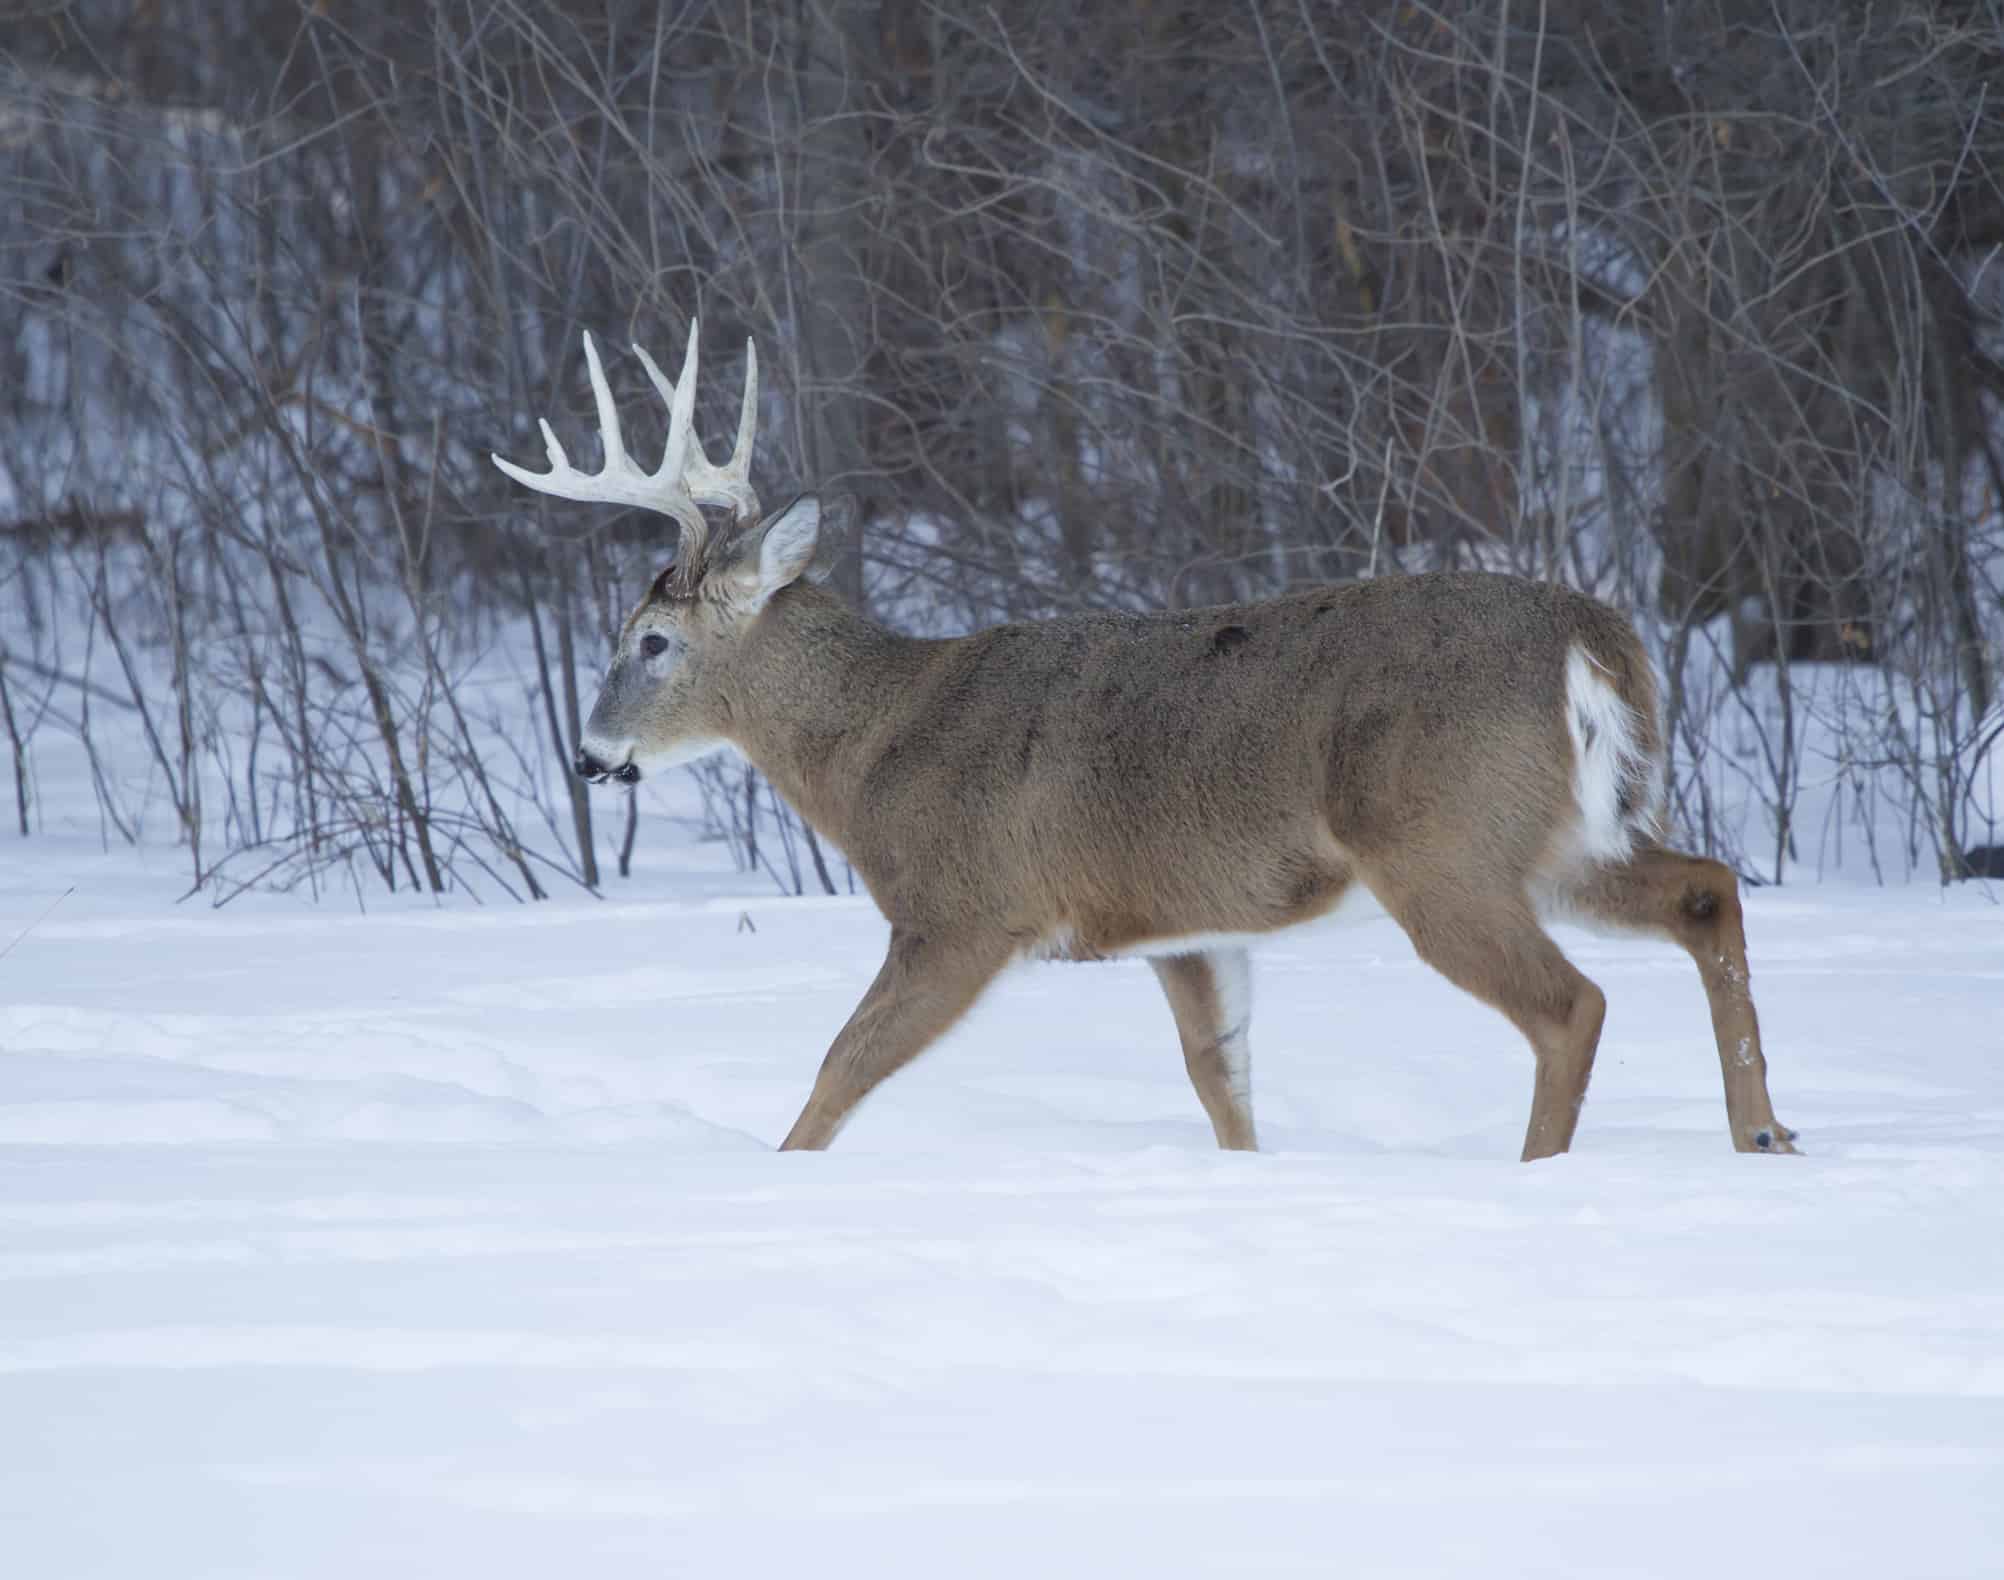 COLUMN: Winter survival a struggle and a skill for deer - Orillia News